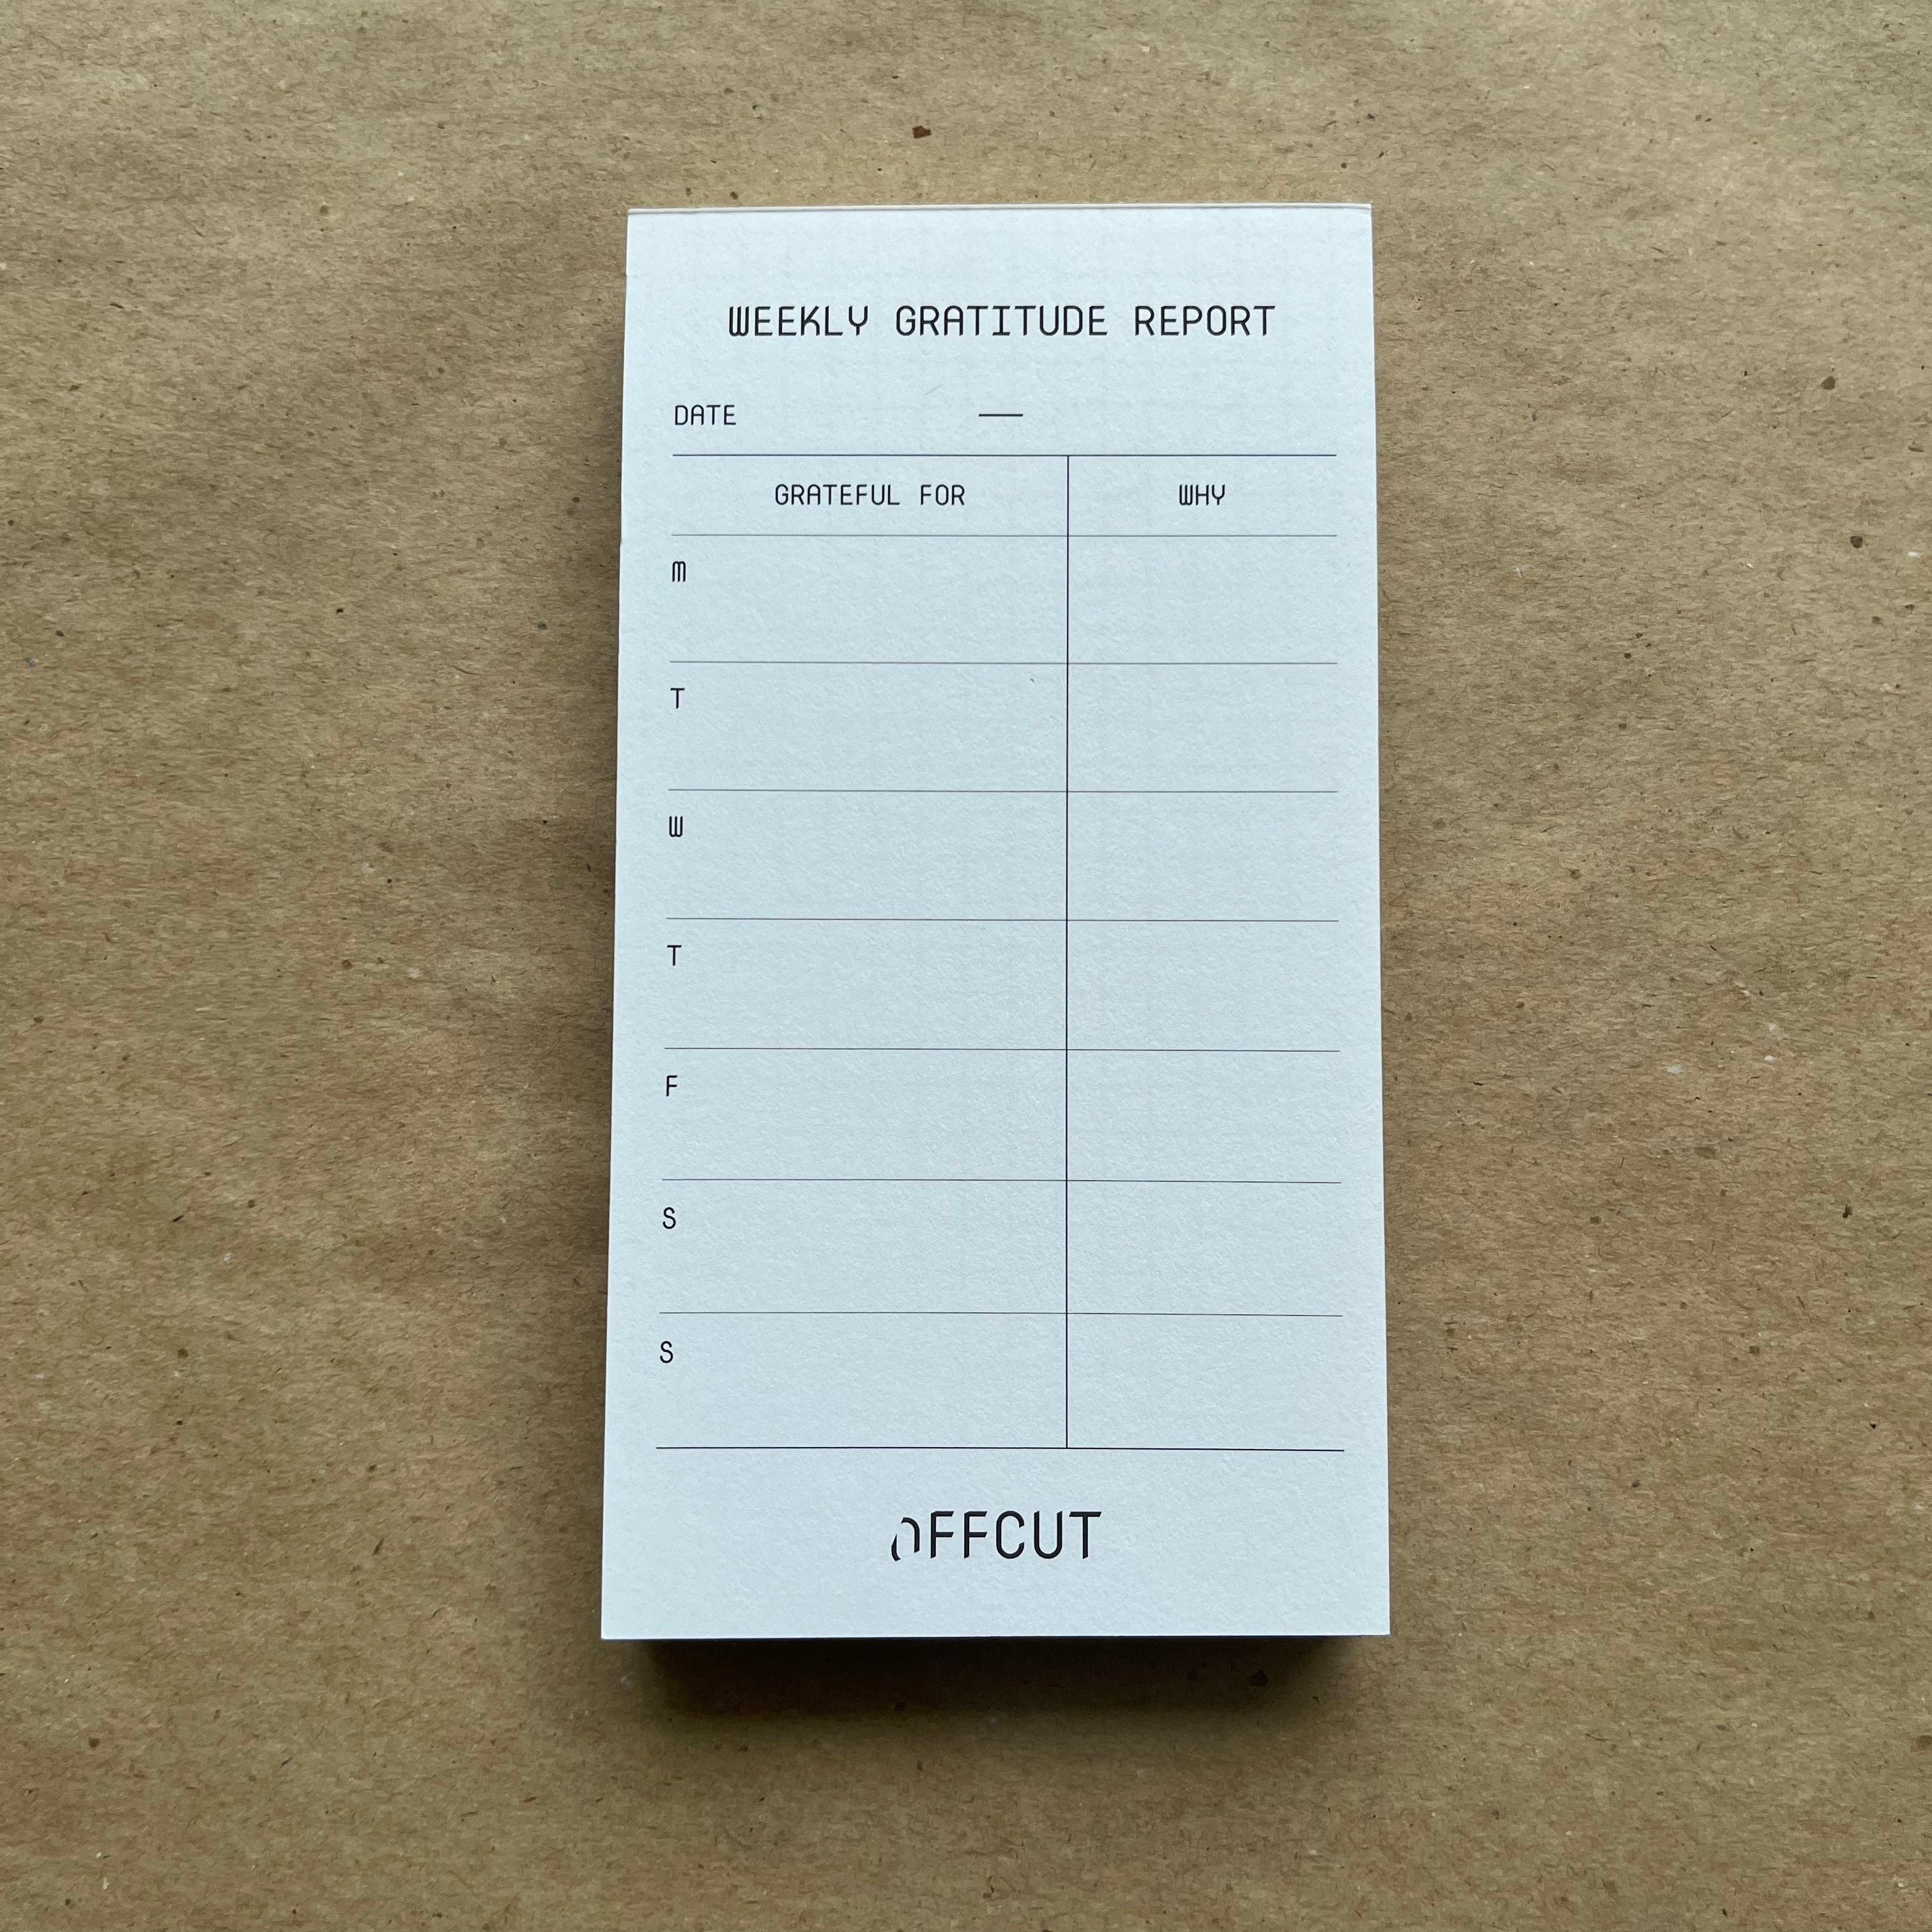 Weekly Gratitude Report by OFFCUT